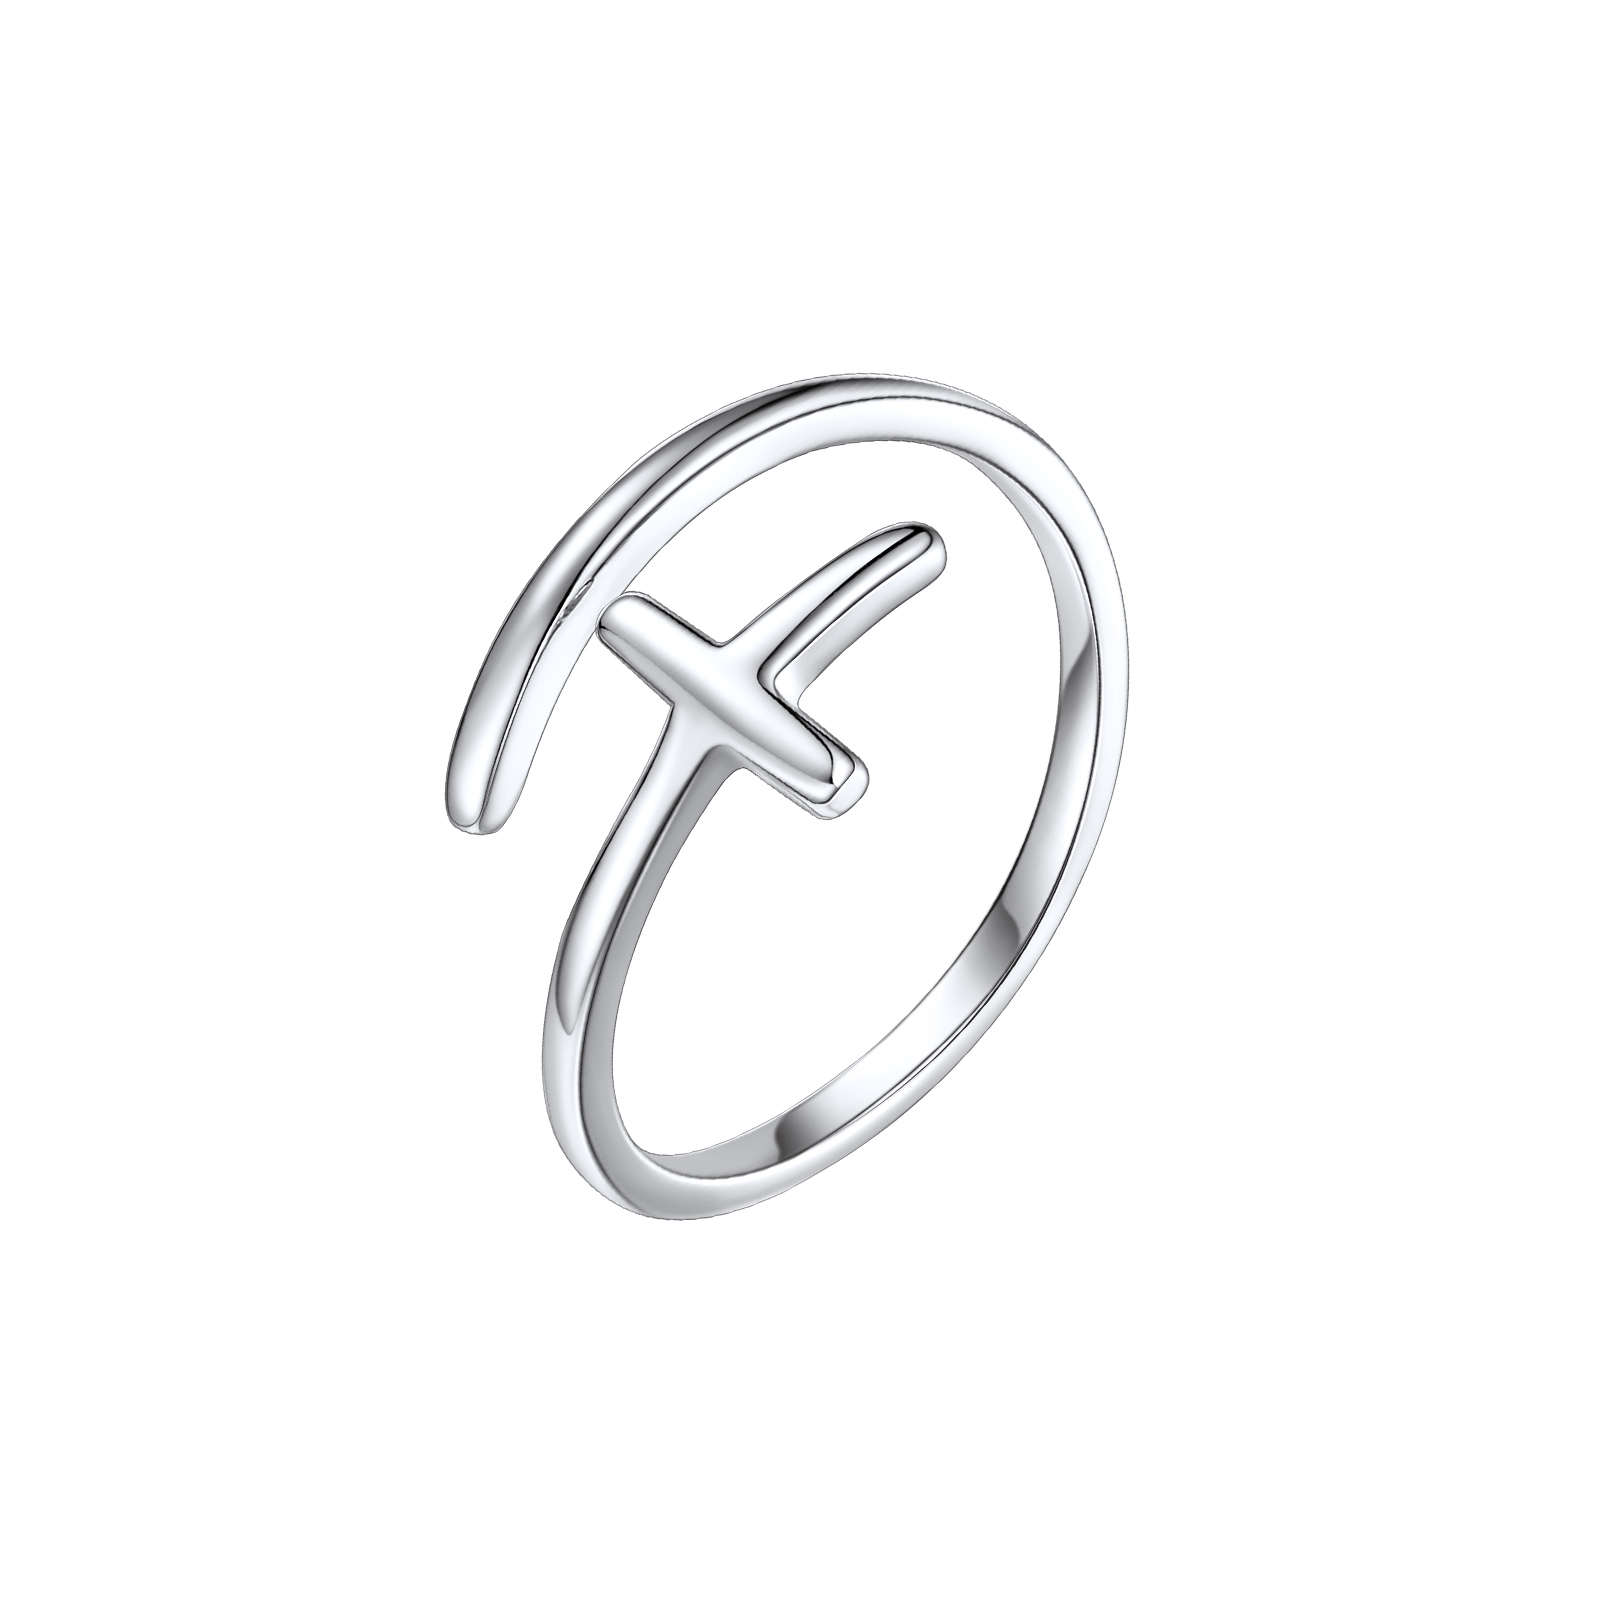 ChicSilver 925 Sterling Silver Side Cross Ring For Women